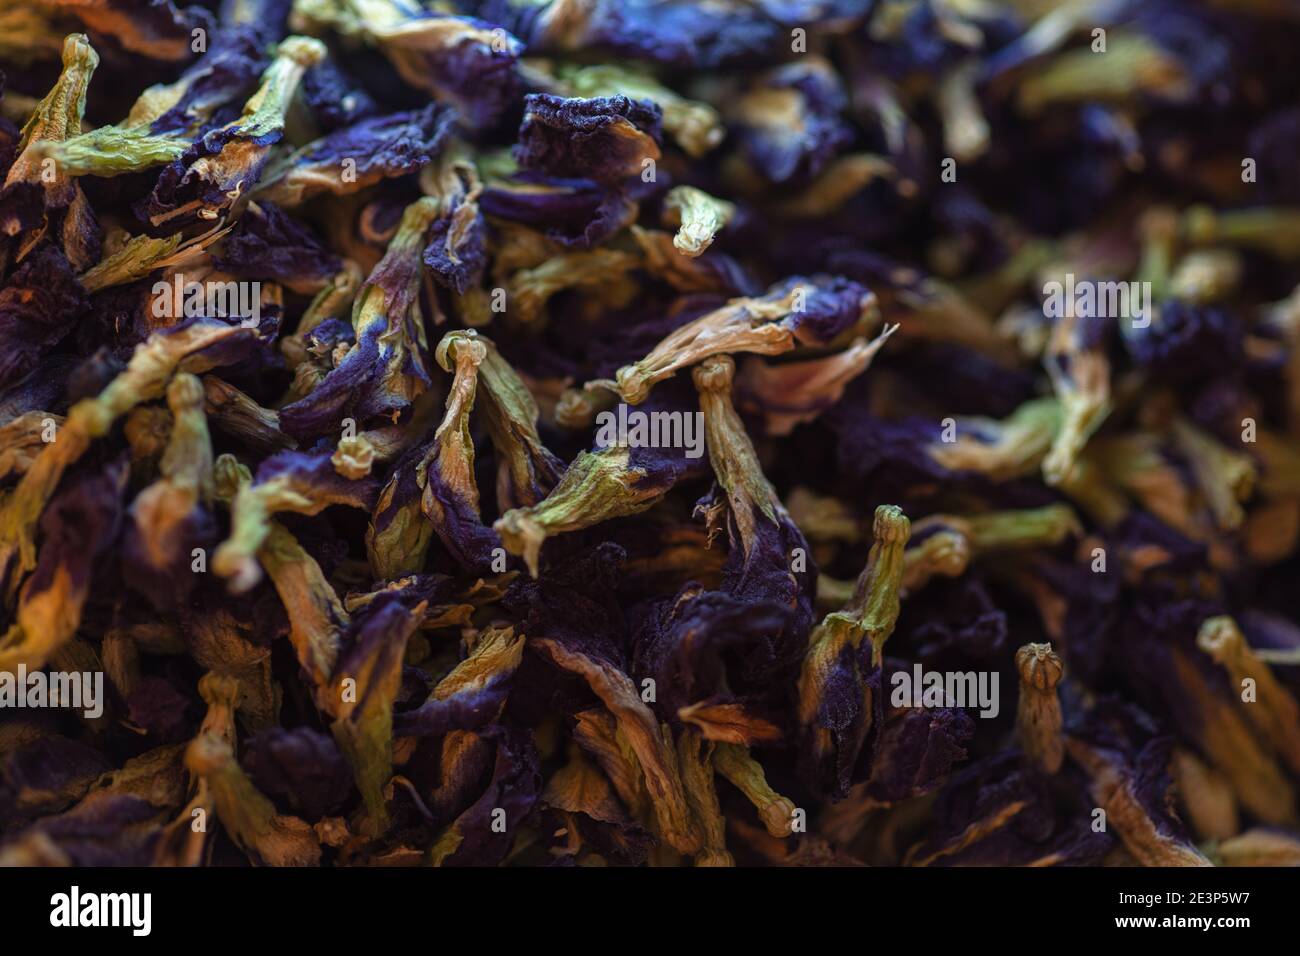 Flowers of the dye plant blue clitoria (Clitoria ternatea) for coloring food blue Stock Photo